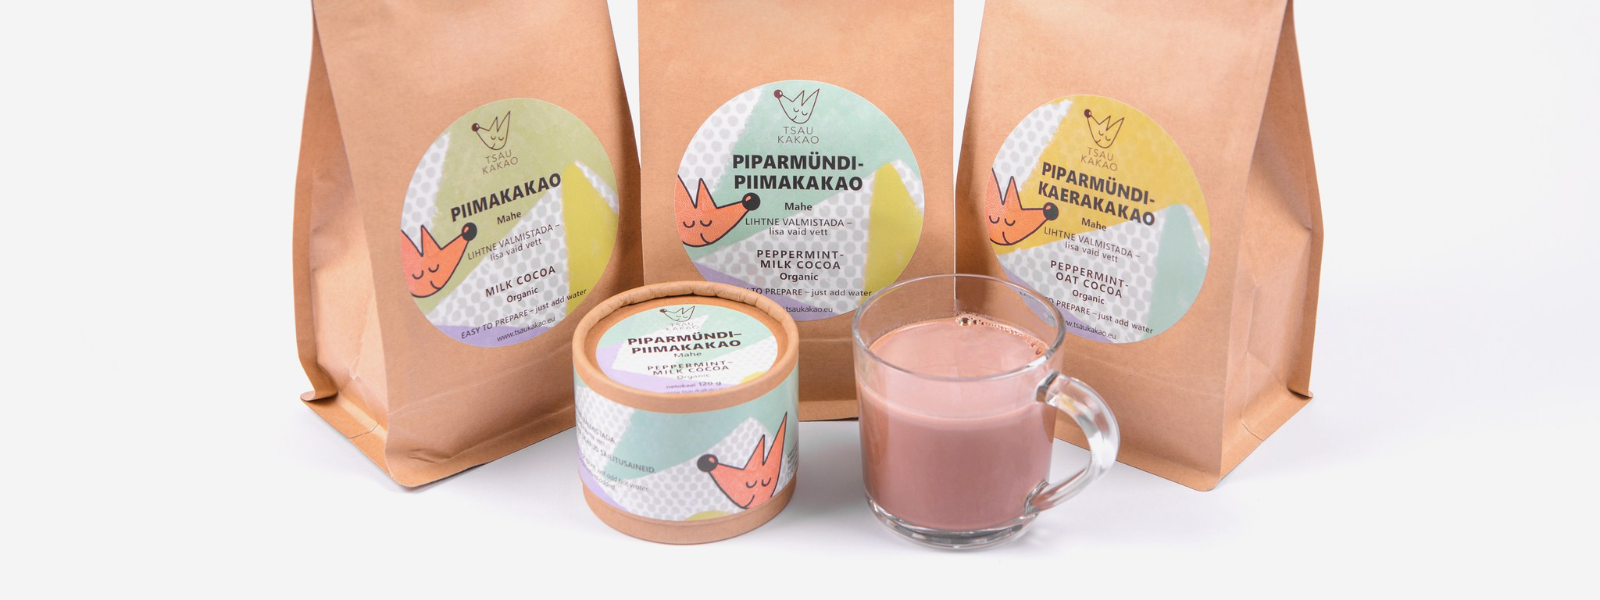 ROHELINE UBA OÜ - We offer a range of functional cocoa blends tailored for health and taste.